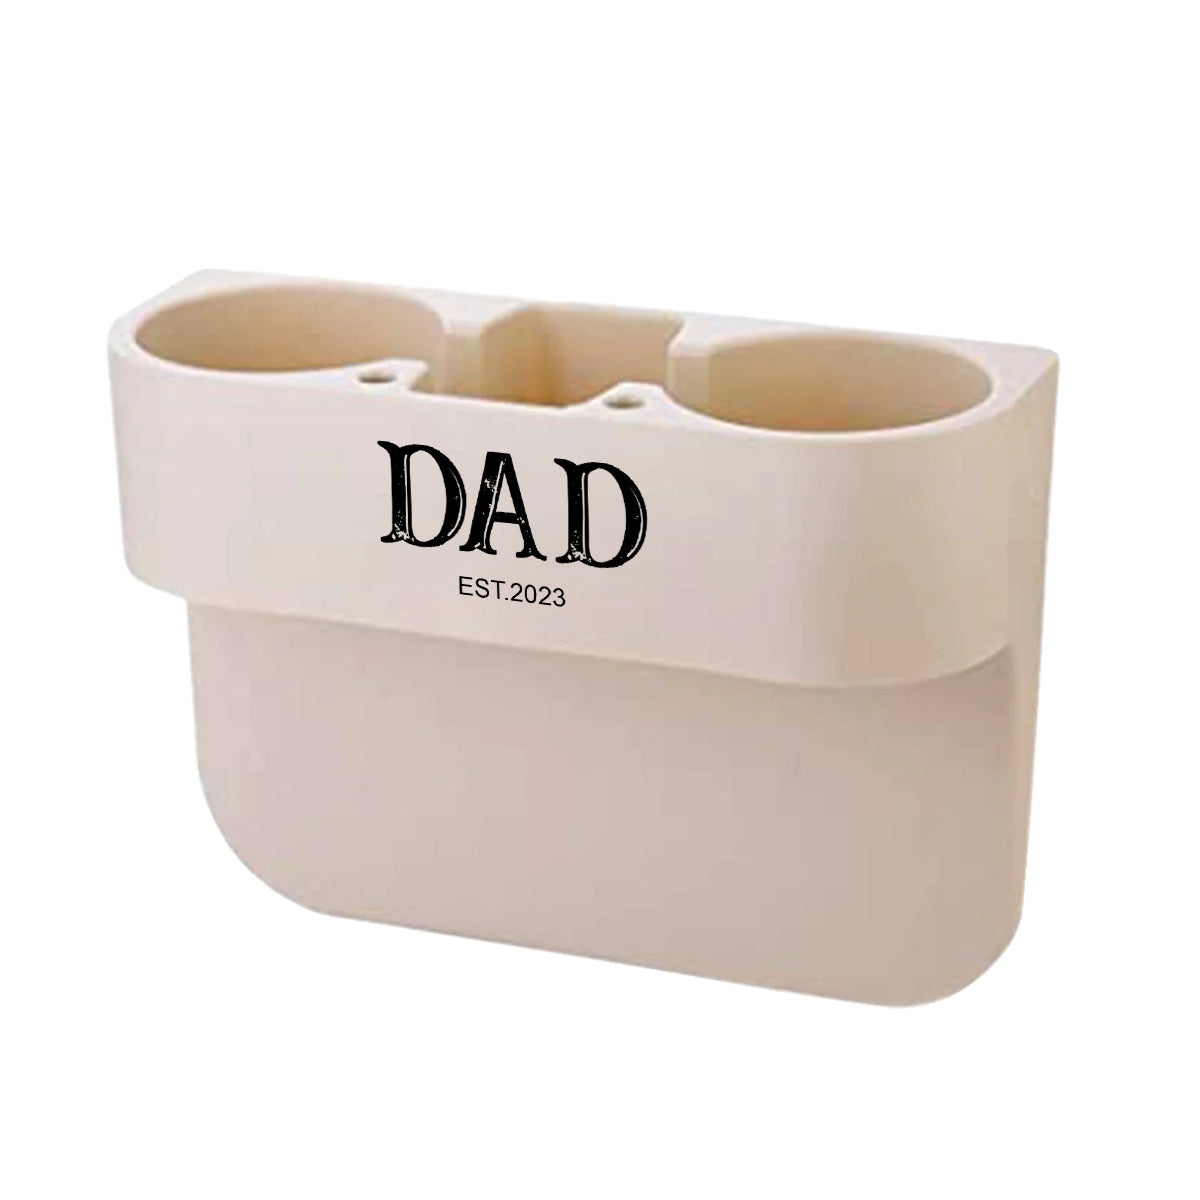 Cup Holder Portable Multifunction Vehicle Seat Cup Cell Phone Drinks Holder Box Car Interior Organizer,  DADDY EST YEAR, Happy Father's Day, Custom For Your Cars, Car Accessories KX11995 ,Gift for Daddy 03